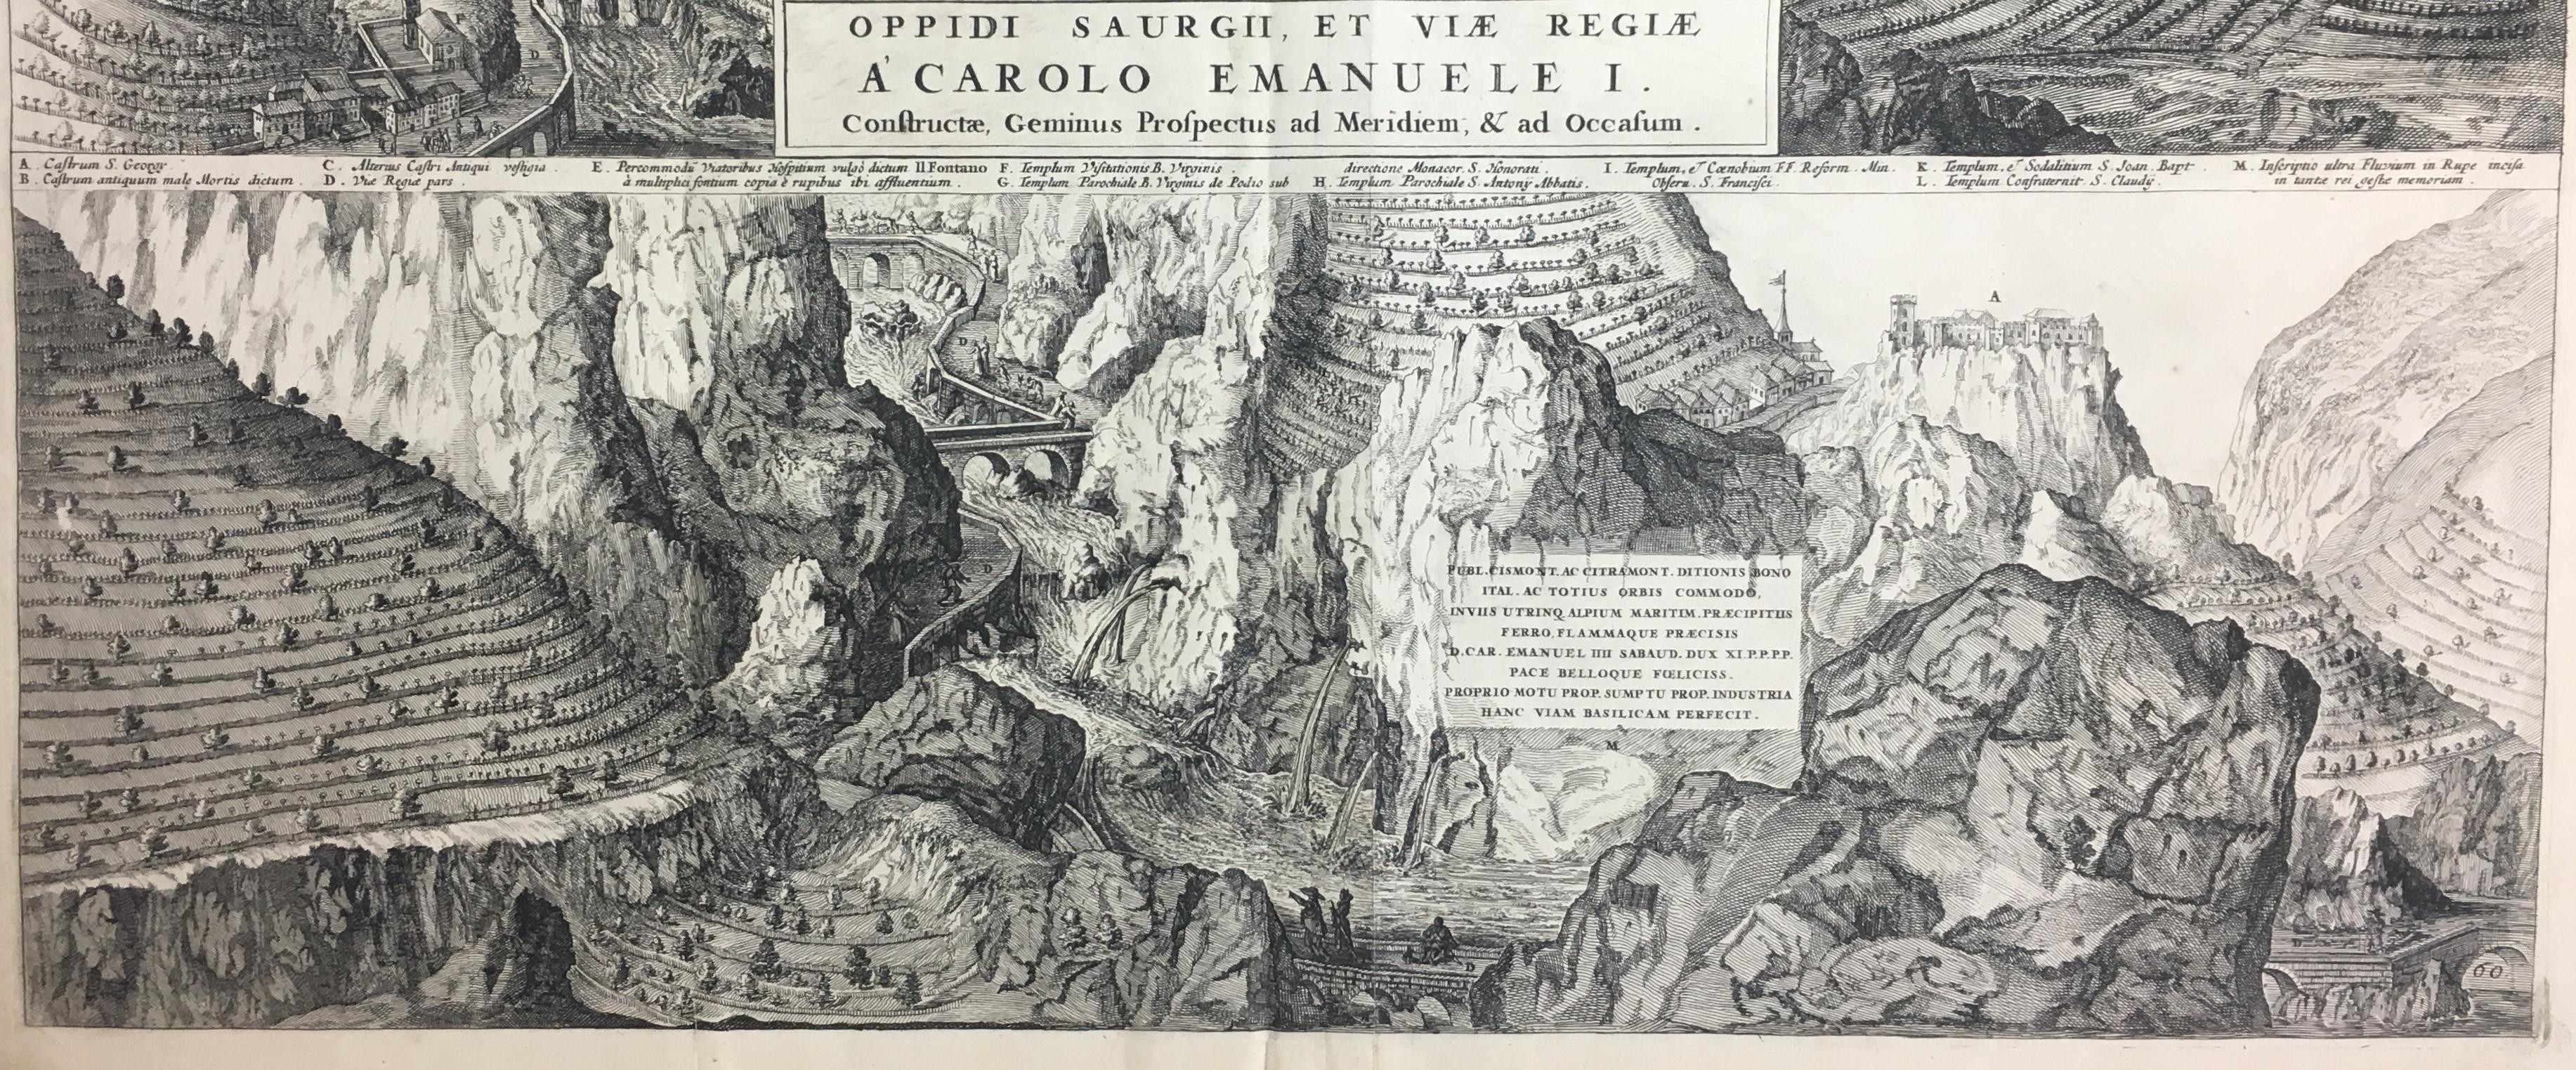 17th century Italian Gravure/Cartography

Le Theatrum statuum Regiae Celsitudinis Sabaudiæ Ducis or at Theatrum Statum Sabaudiæ, is a representative and iconographic representation from the states of the Savoie manor at the time of Charles-Emmanuel